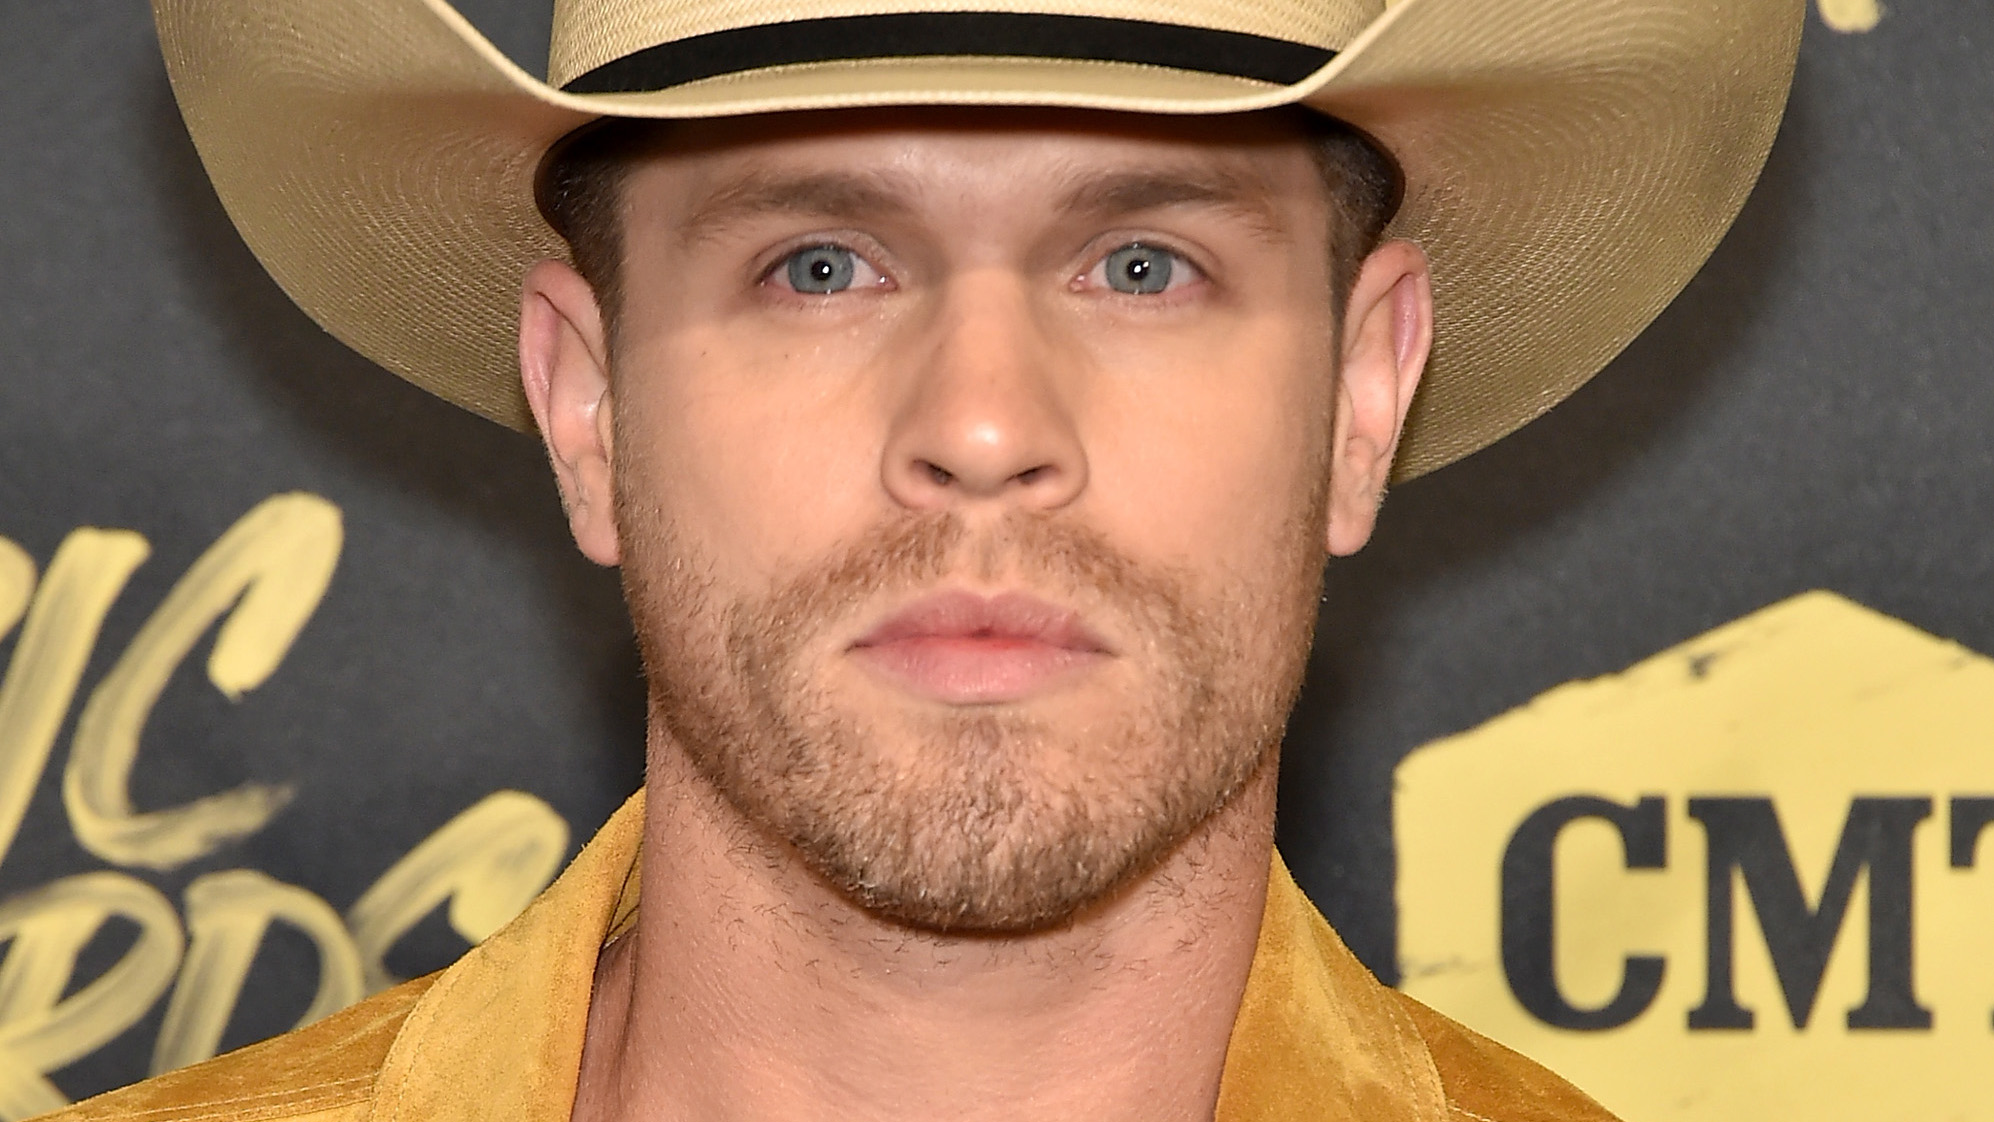 Dustin Lynch to become newest member of Grand Ole Opry